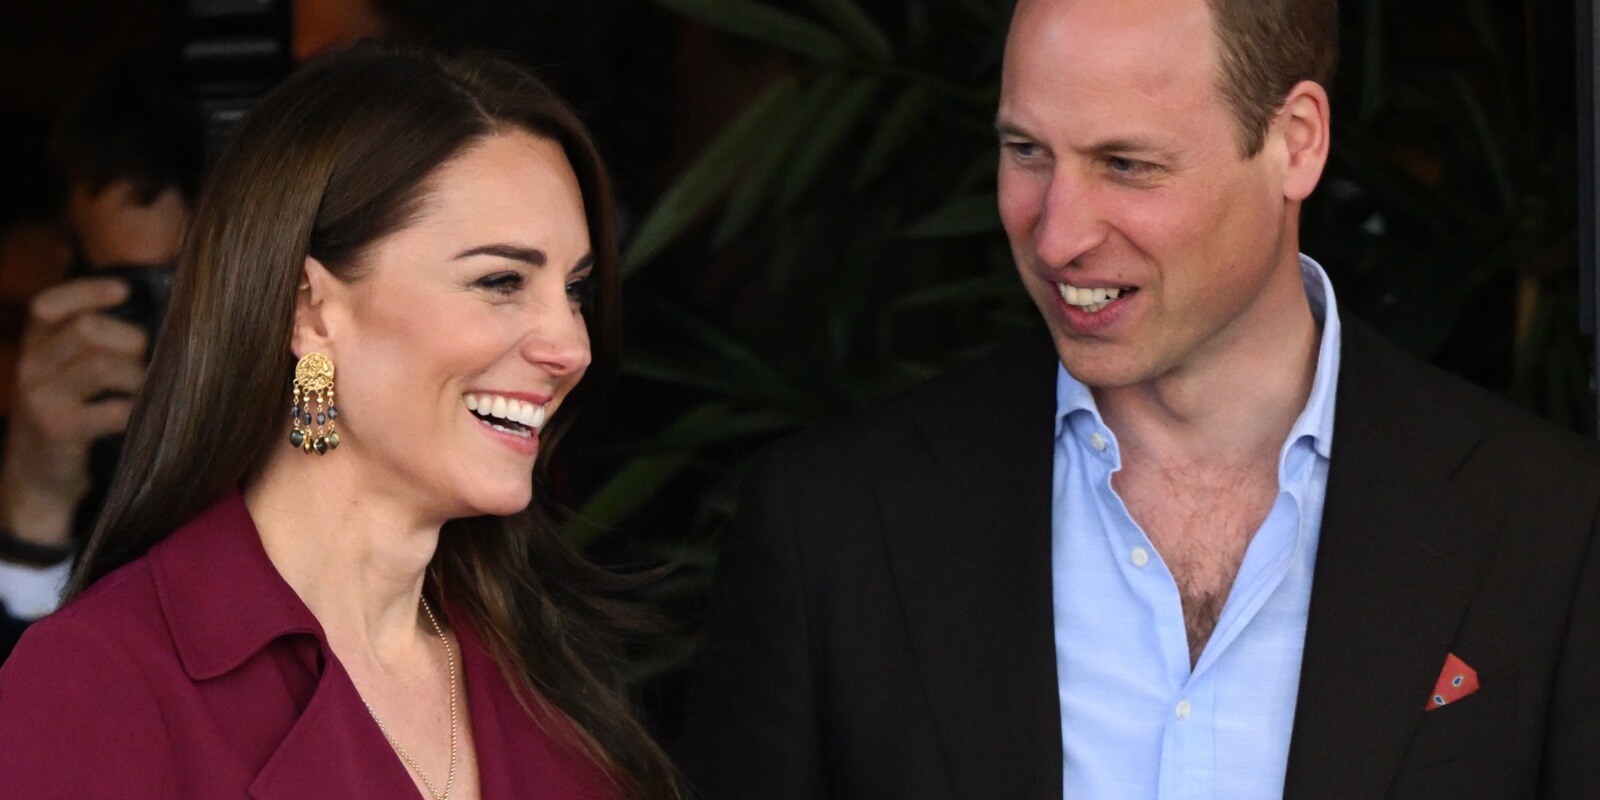 Kate Middleton and Prince William pose together during a recent royal event in Birmingham, England.